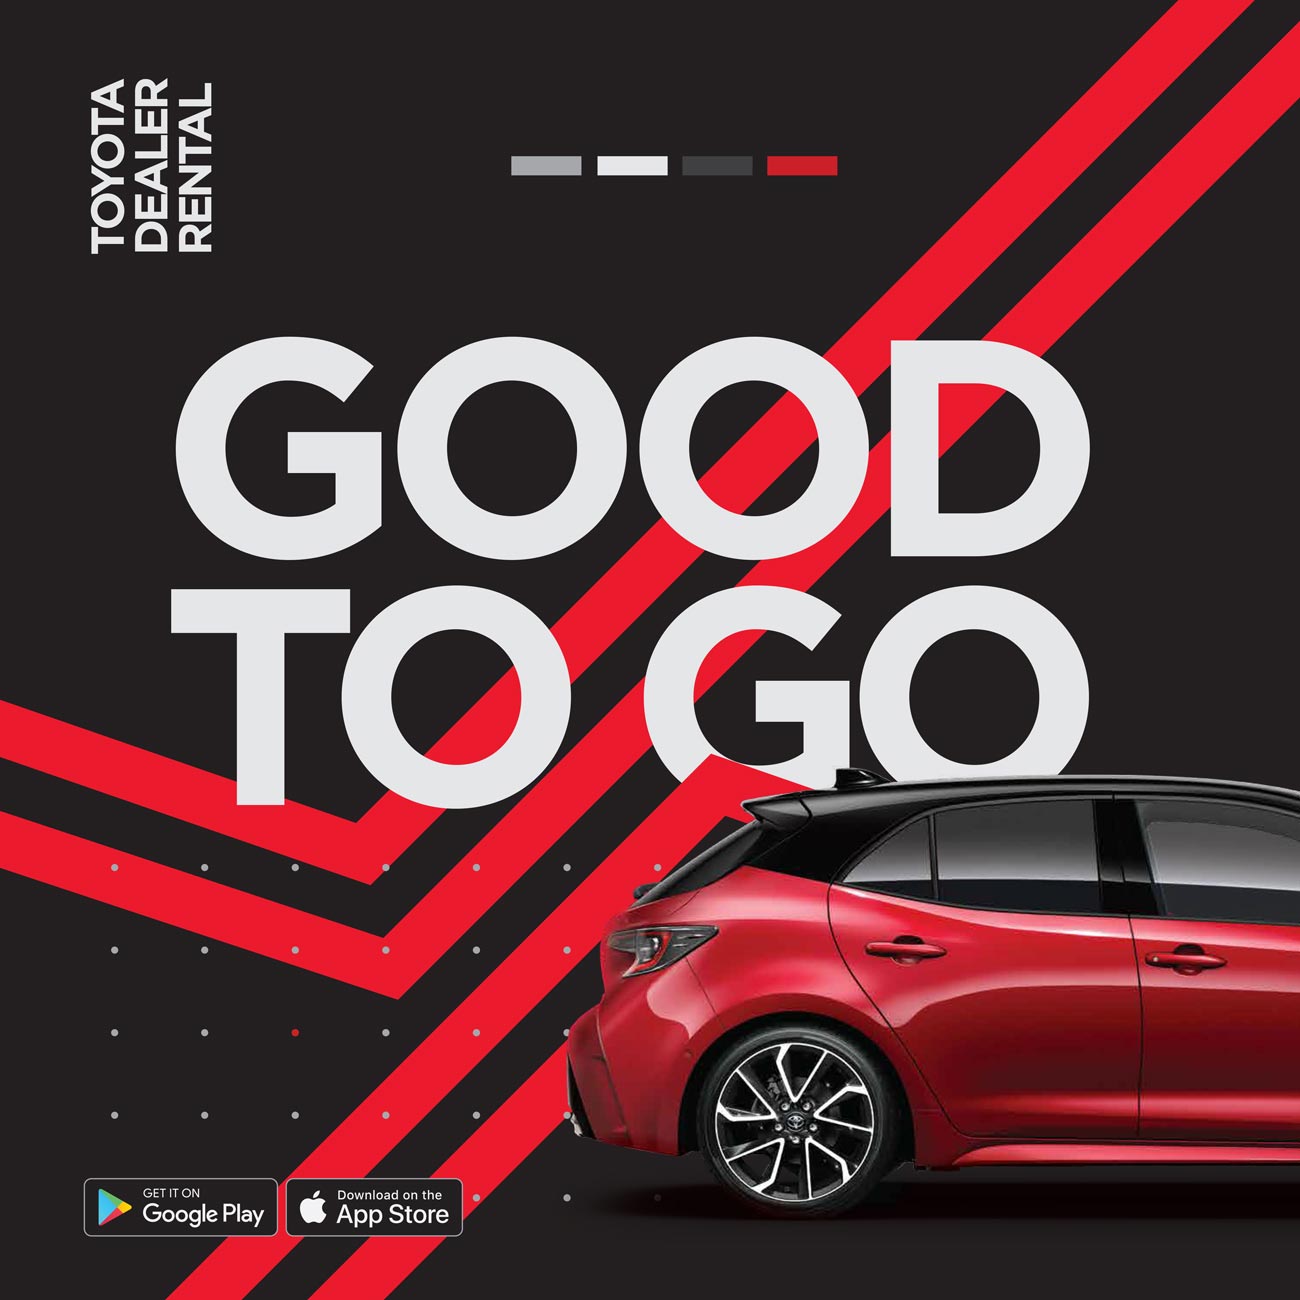 Example branded social media post for Toyota Dealer Rental, displaying red car and "Good to go" text